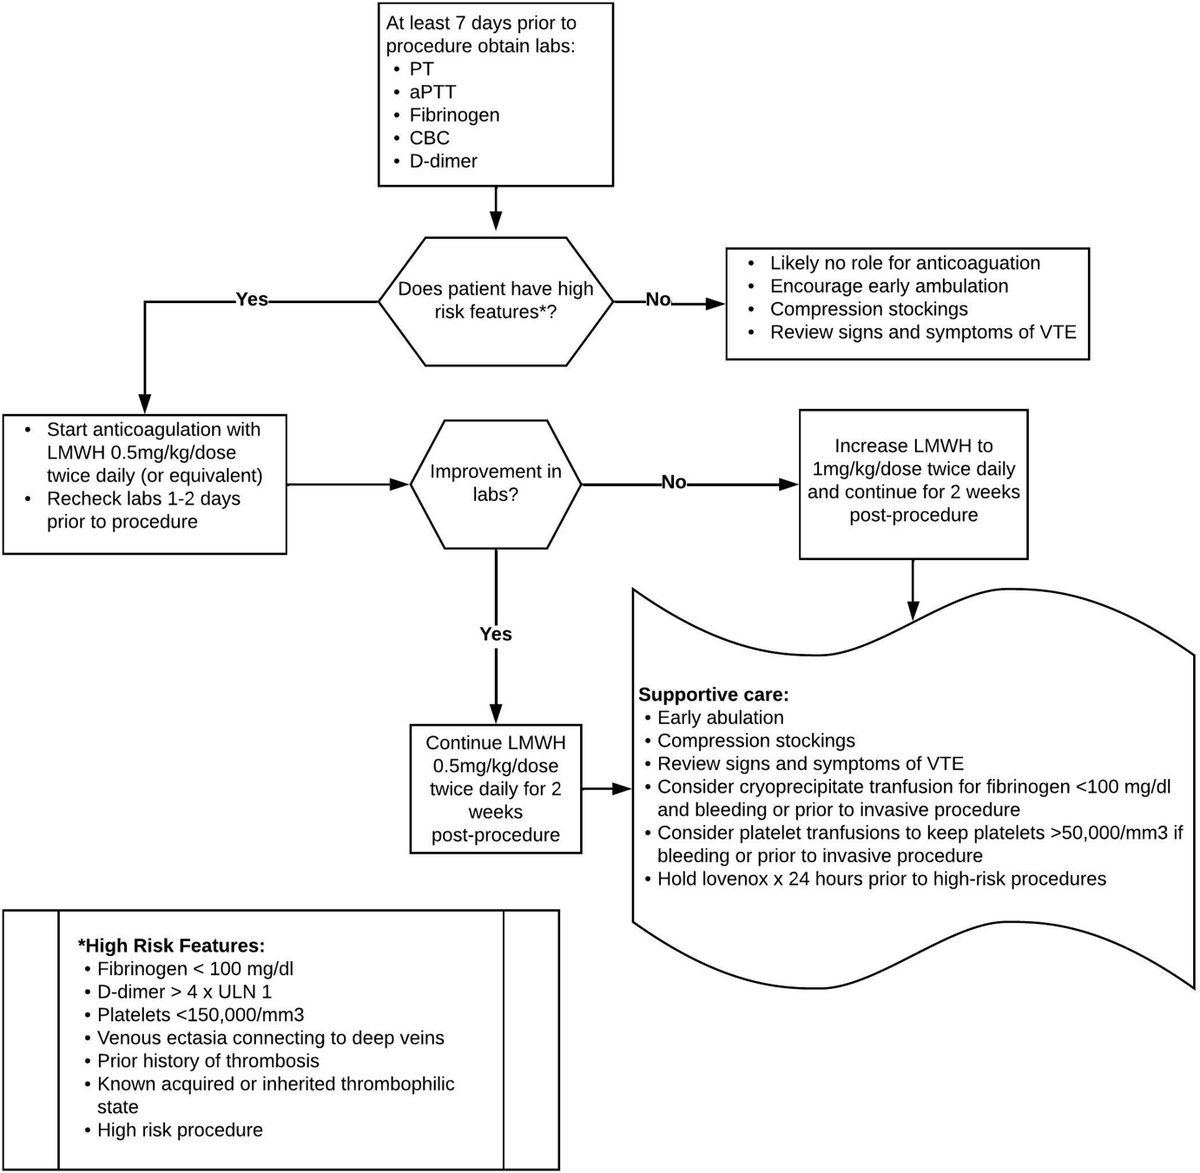 Read this State of the Art review on anticoagulation and vascular malformations (VM)! First presented at @isth 2023 in Montreal, this review discusses the classification, hematological complications, and an approach to treating VTE in VM! Read here: rpthjournal.org/article/S2475-…